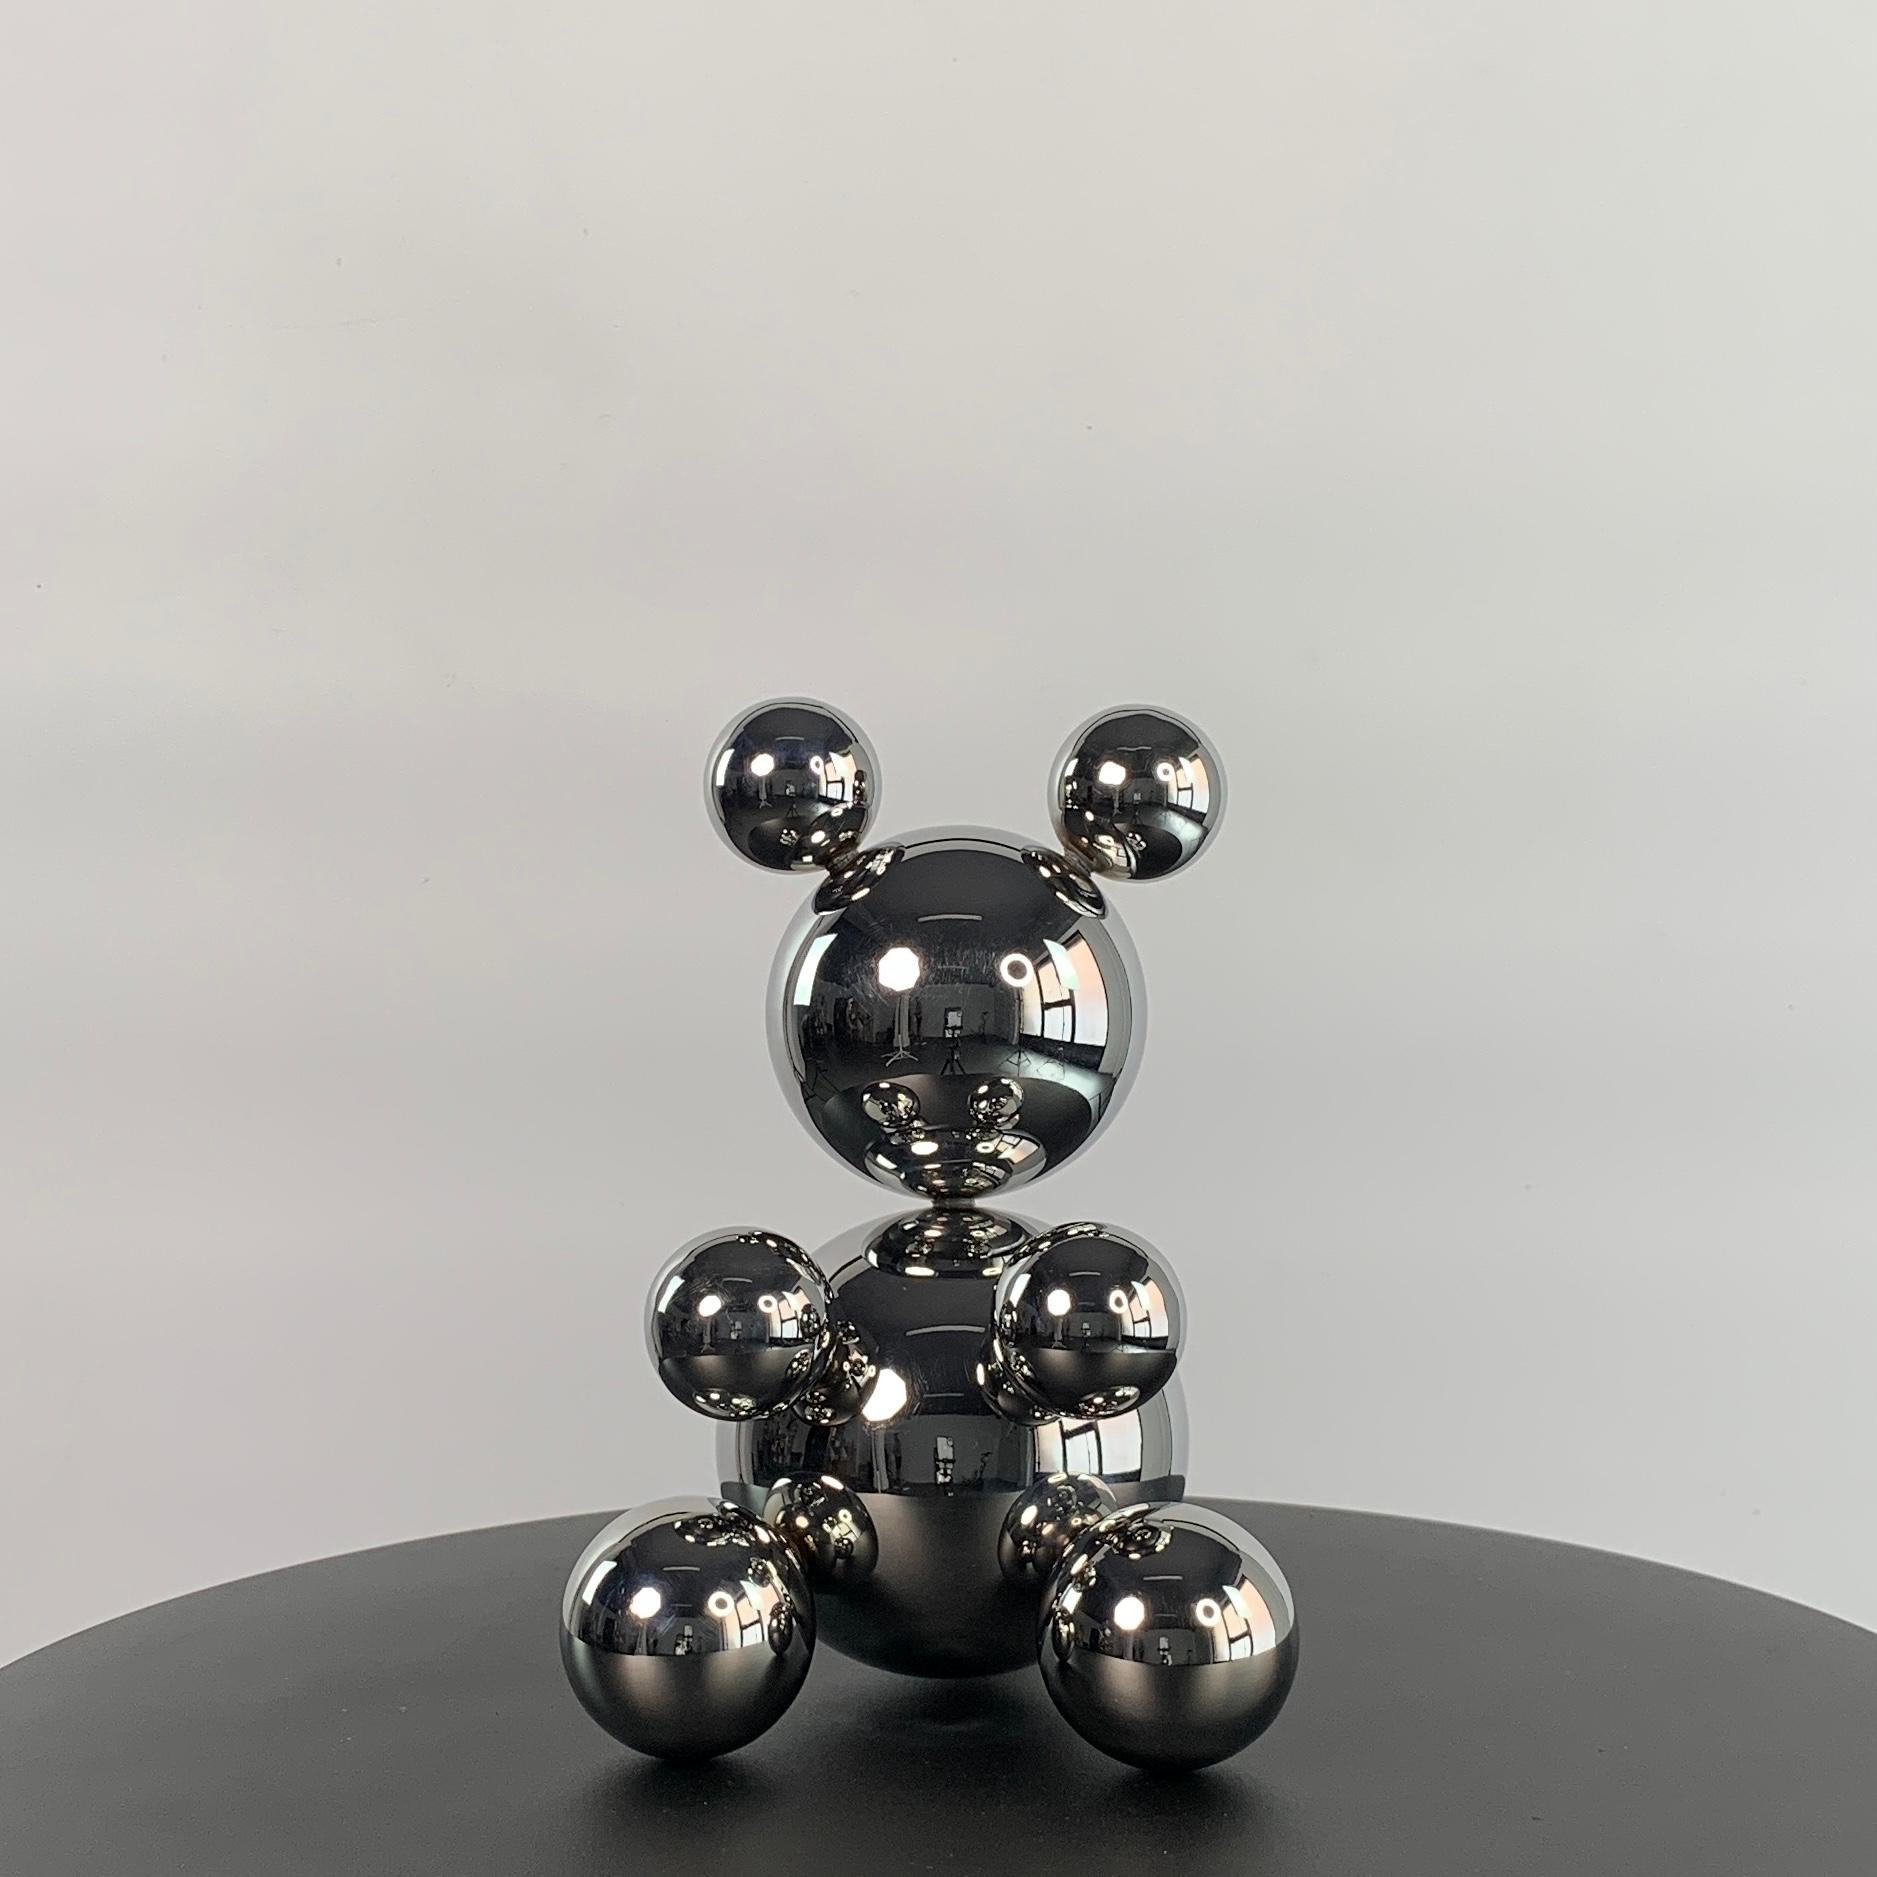 IRENA TONE Abstract Sculpture - Small Stainless Steel Bear 'Diksy'